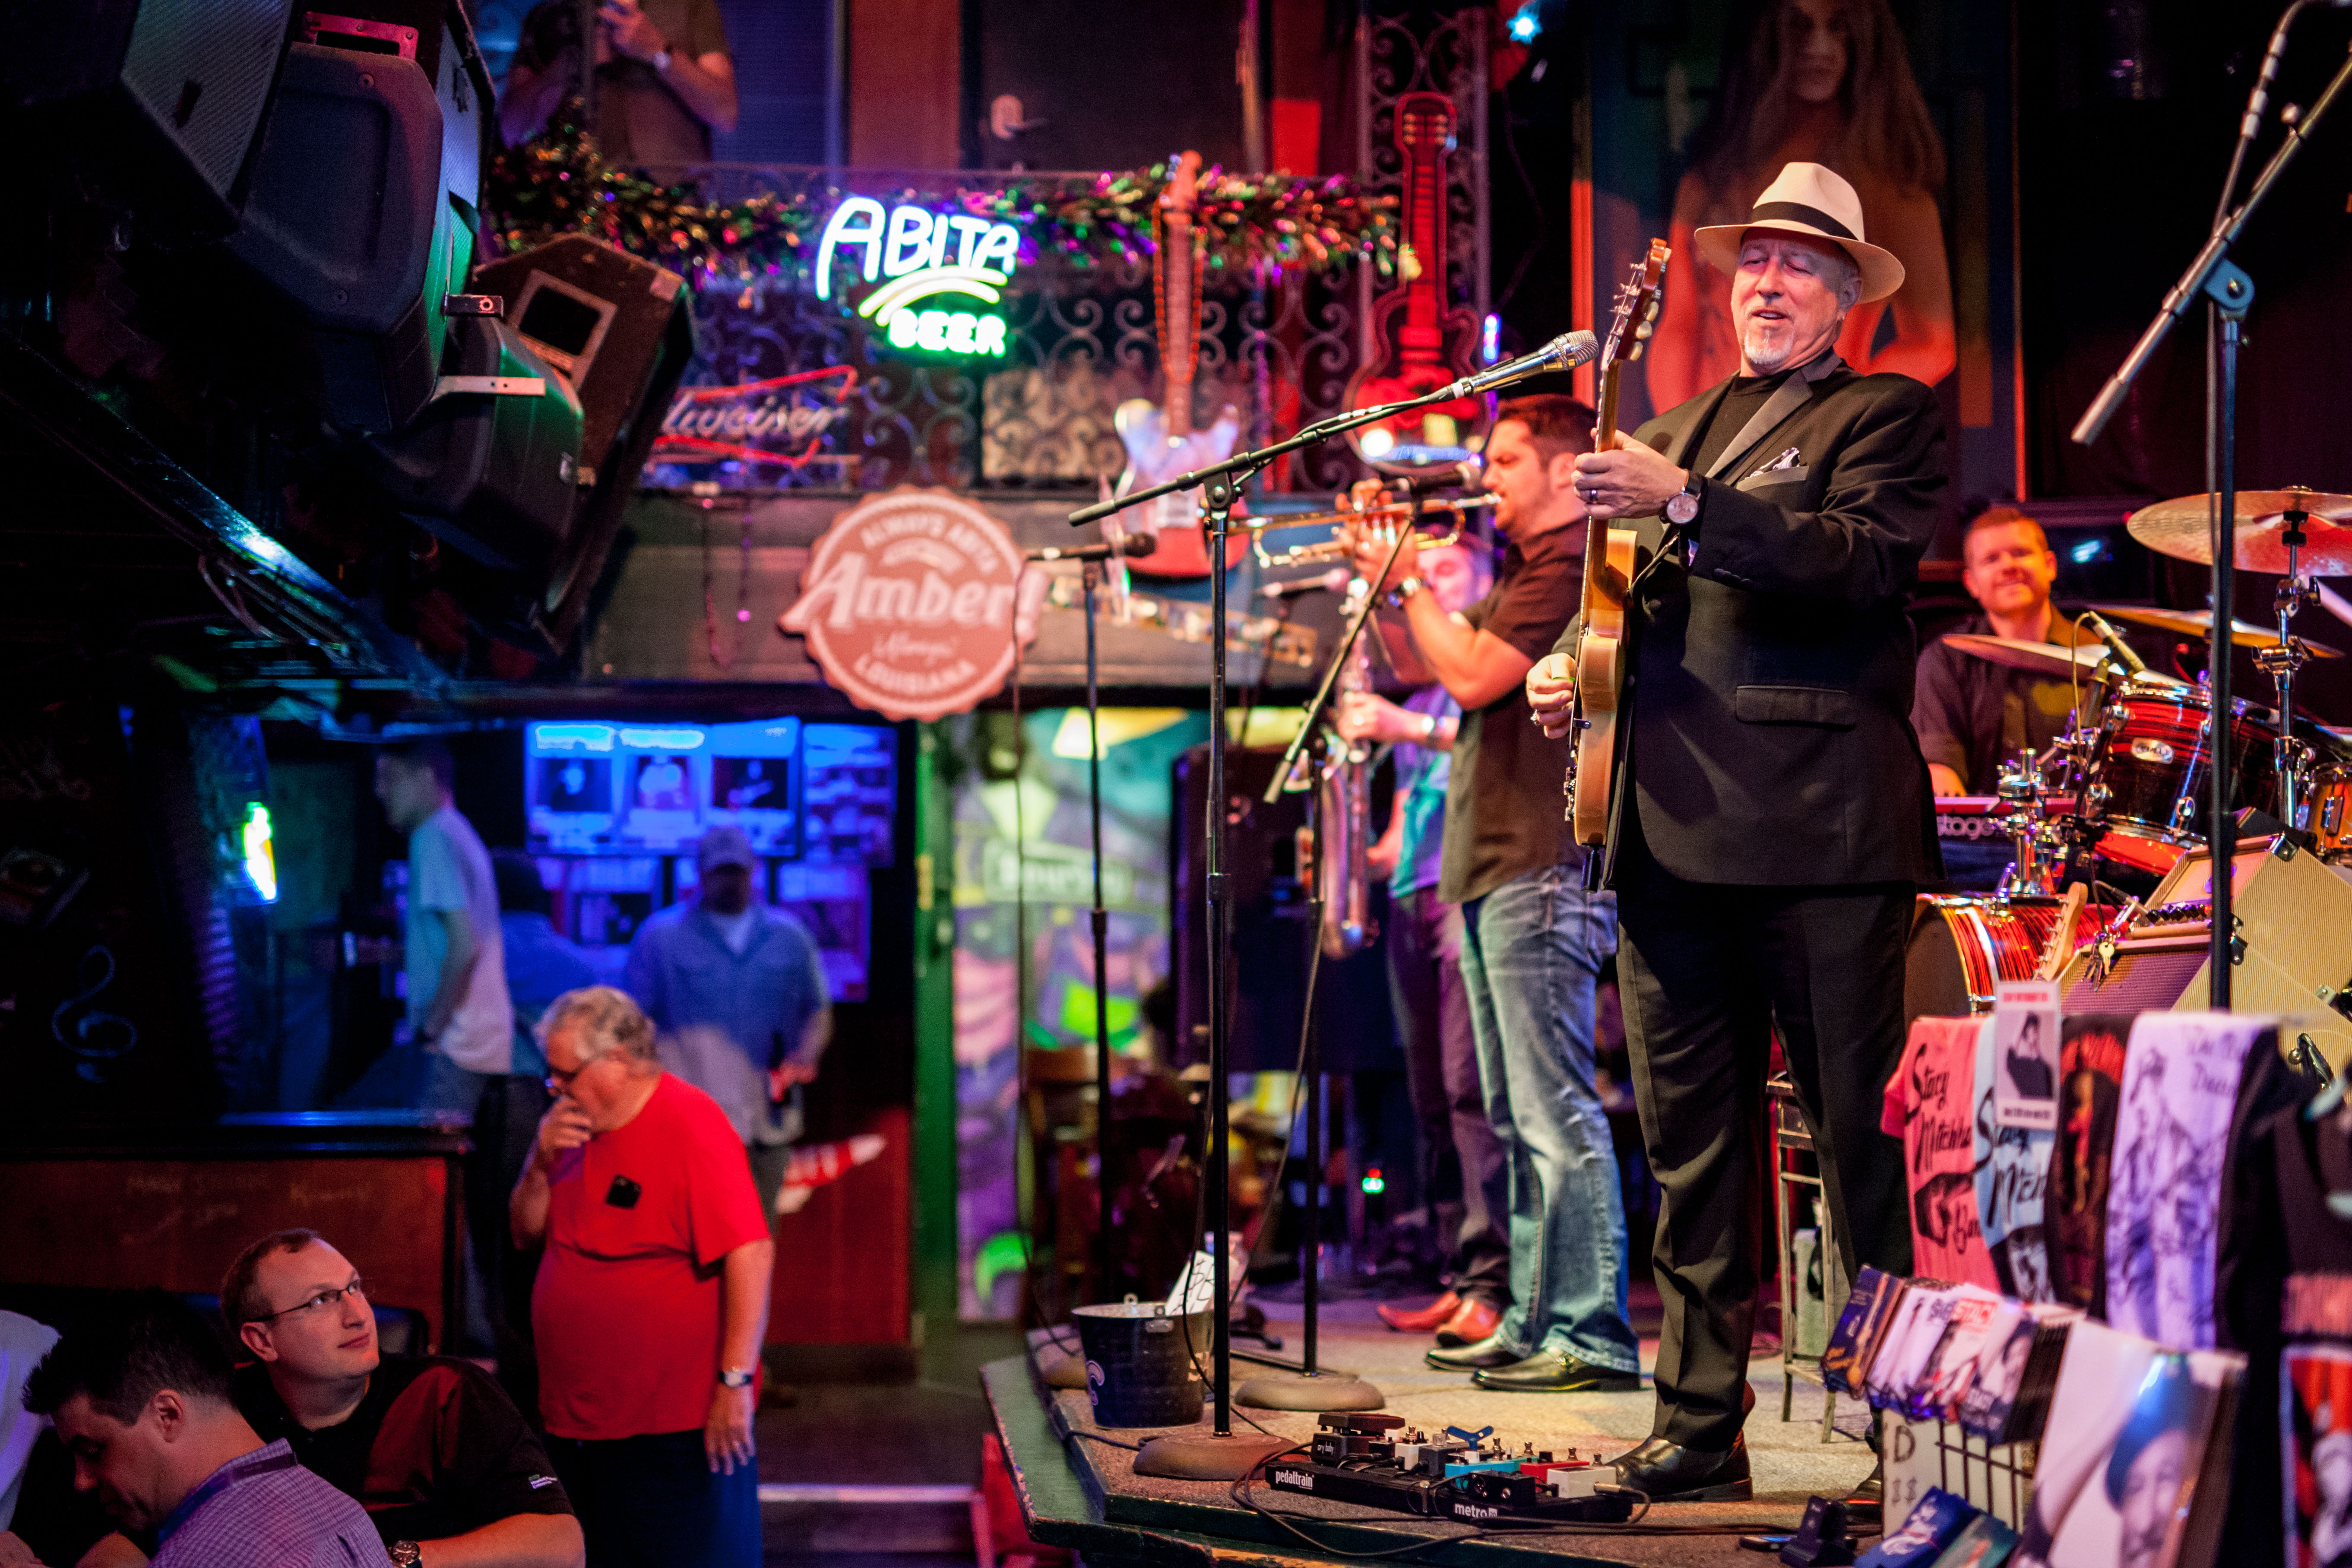 Our Favorite Stories at Bourbon Street Blues and Boogie Bar